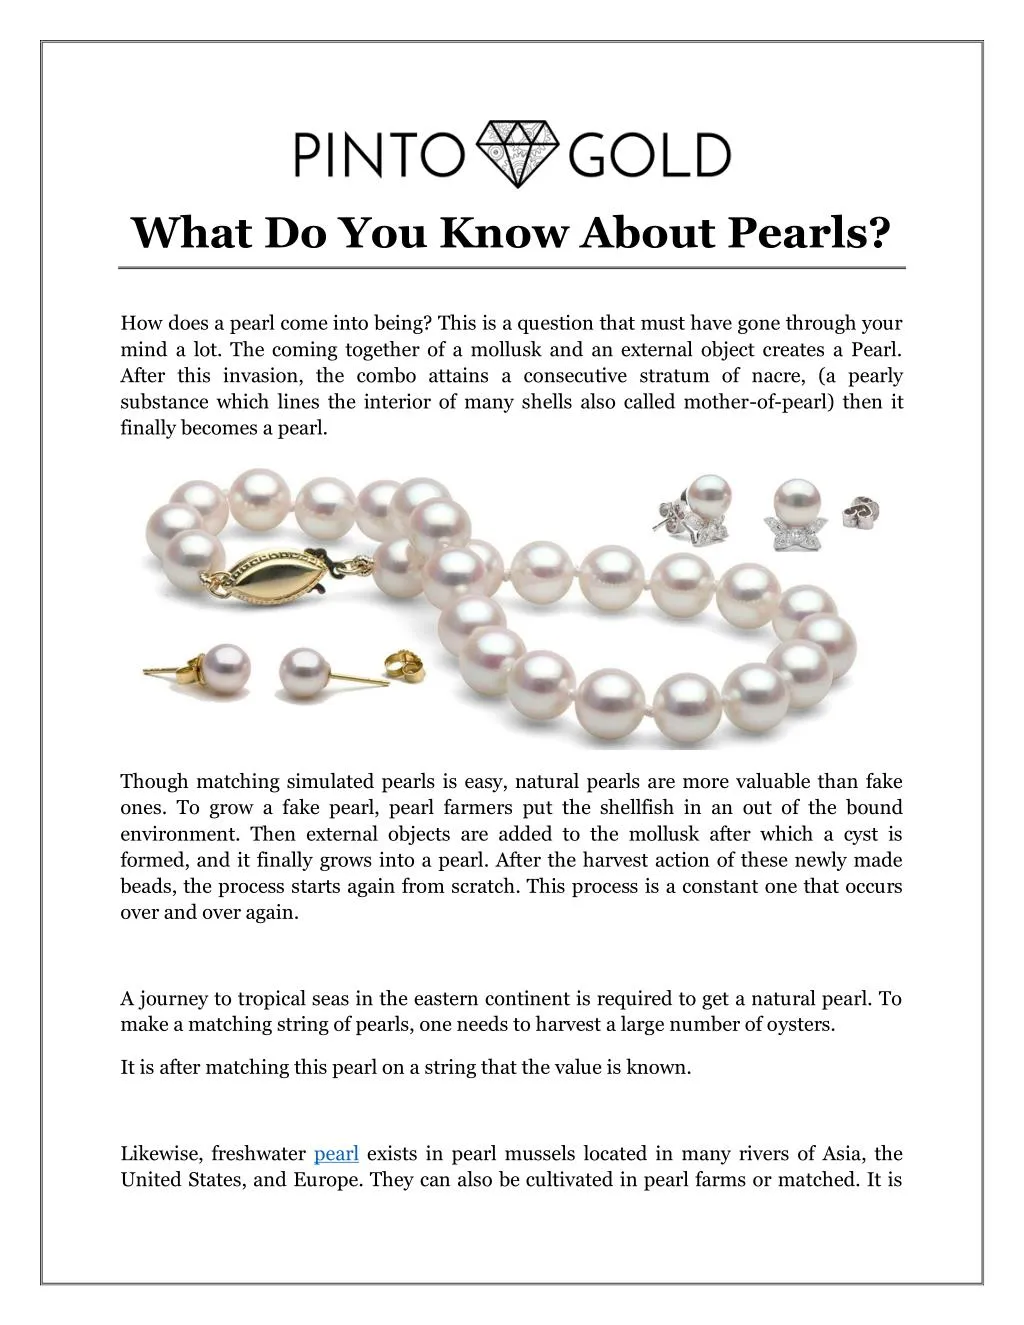 what do you know about pearls